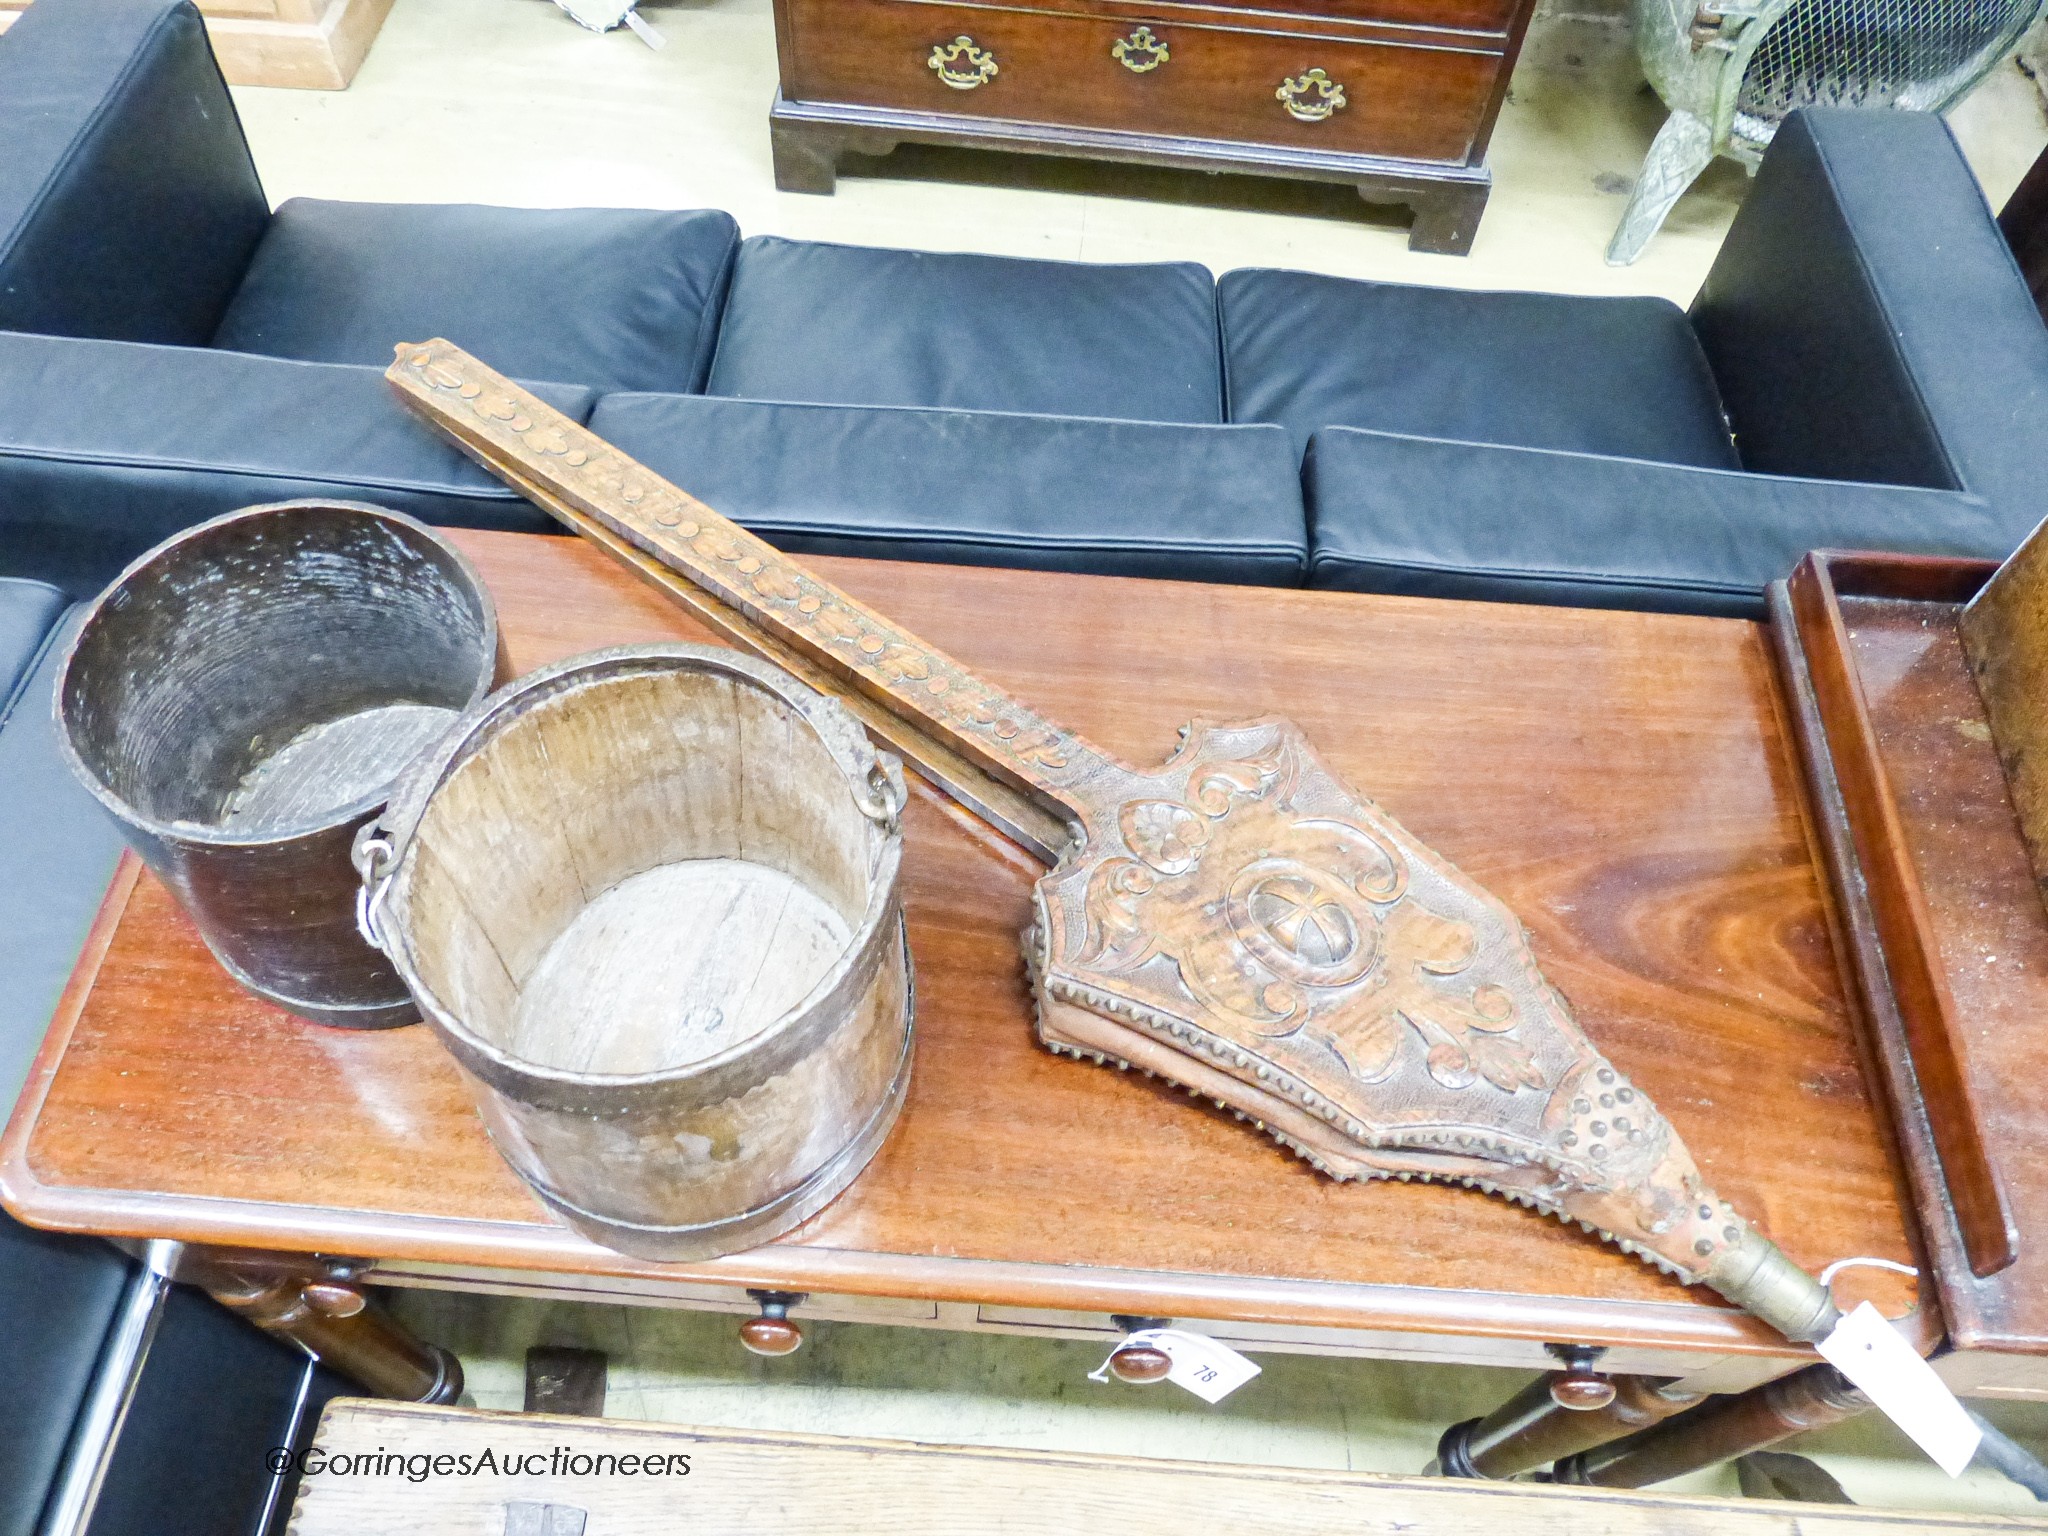 A 19th century coopered cast iron and ash bushel measure, a brass-bound ash gallon measure and a - Image 2 of 3